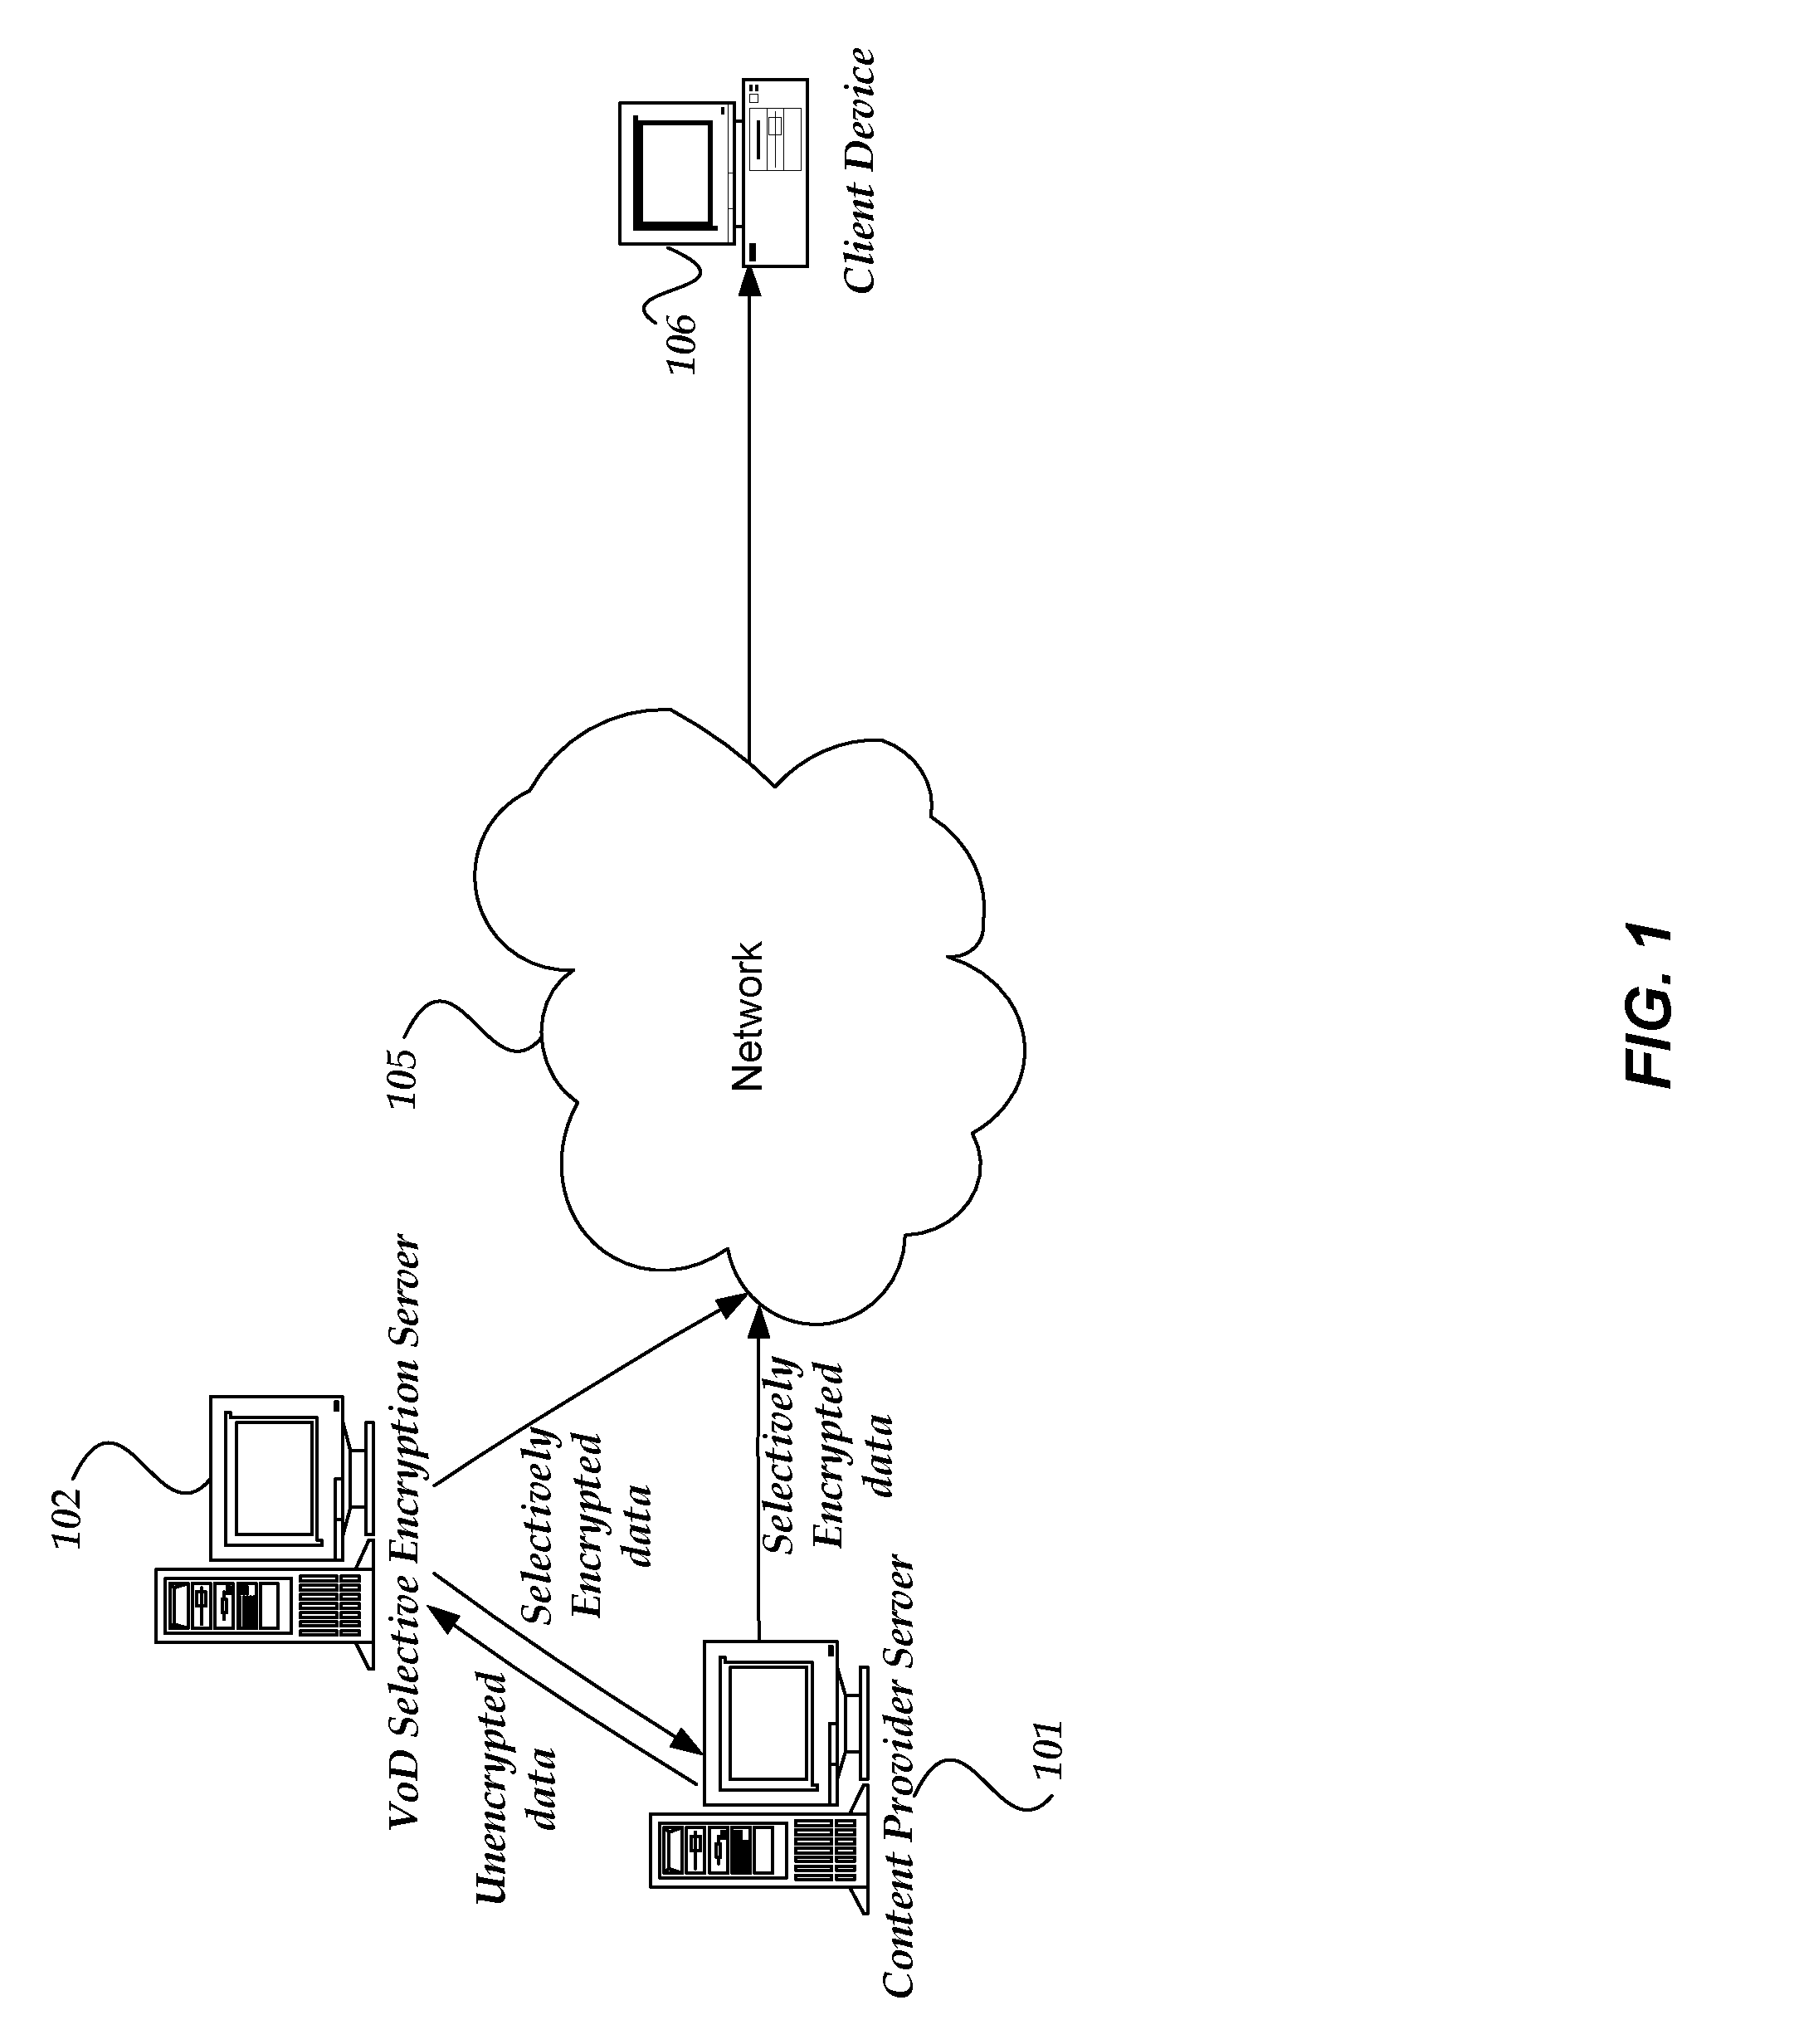 Selective and persistent application level encrytion for video provided to a client